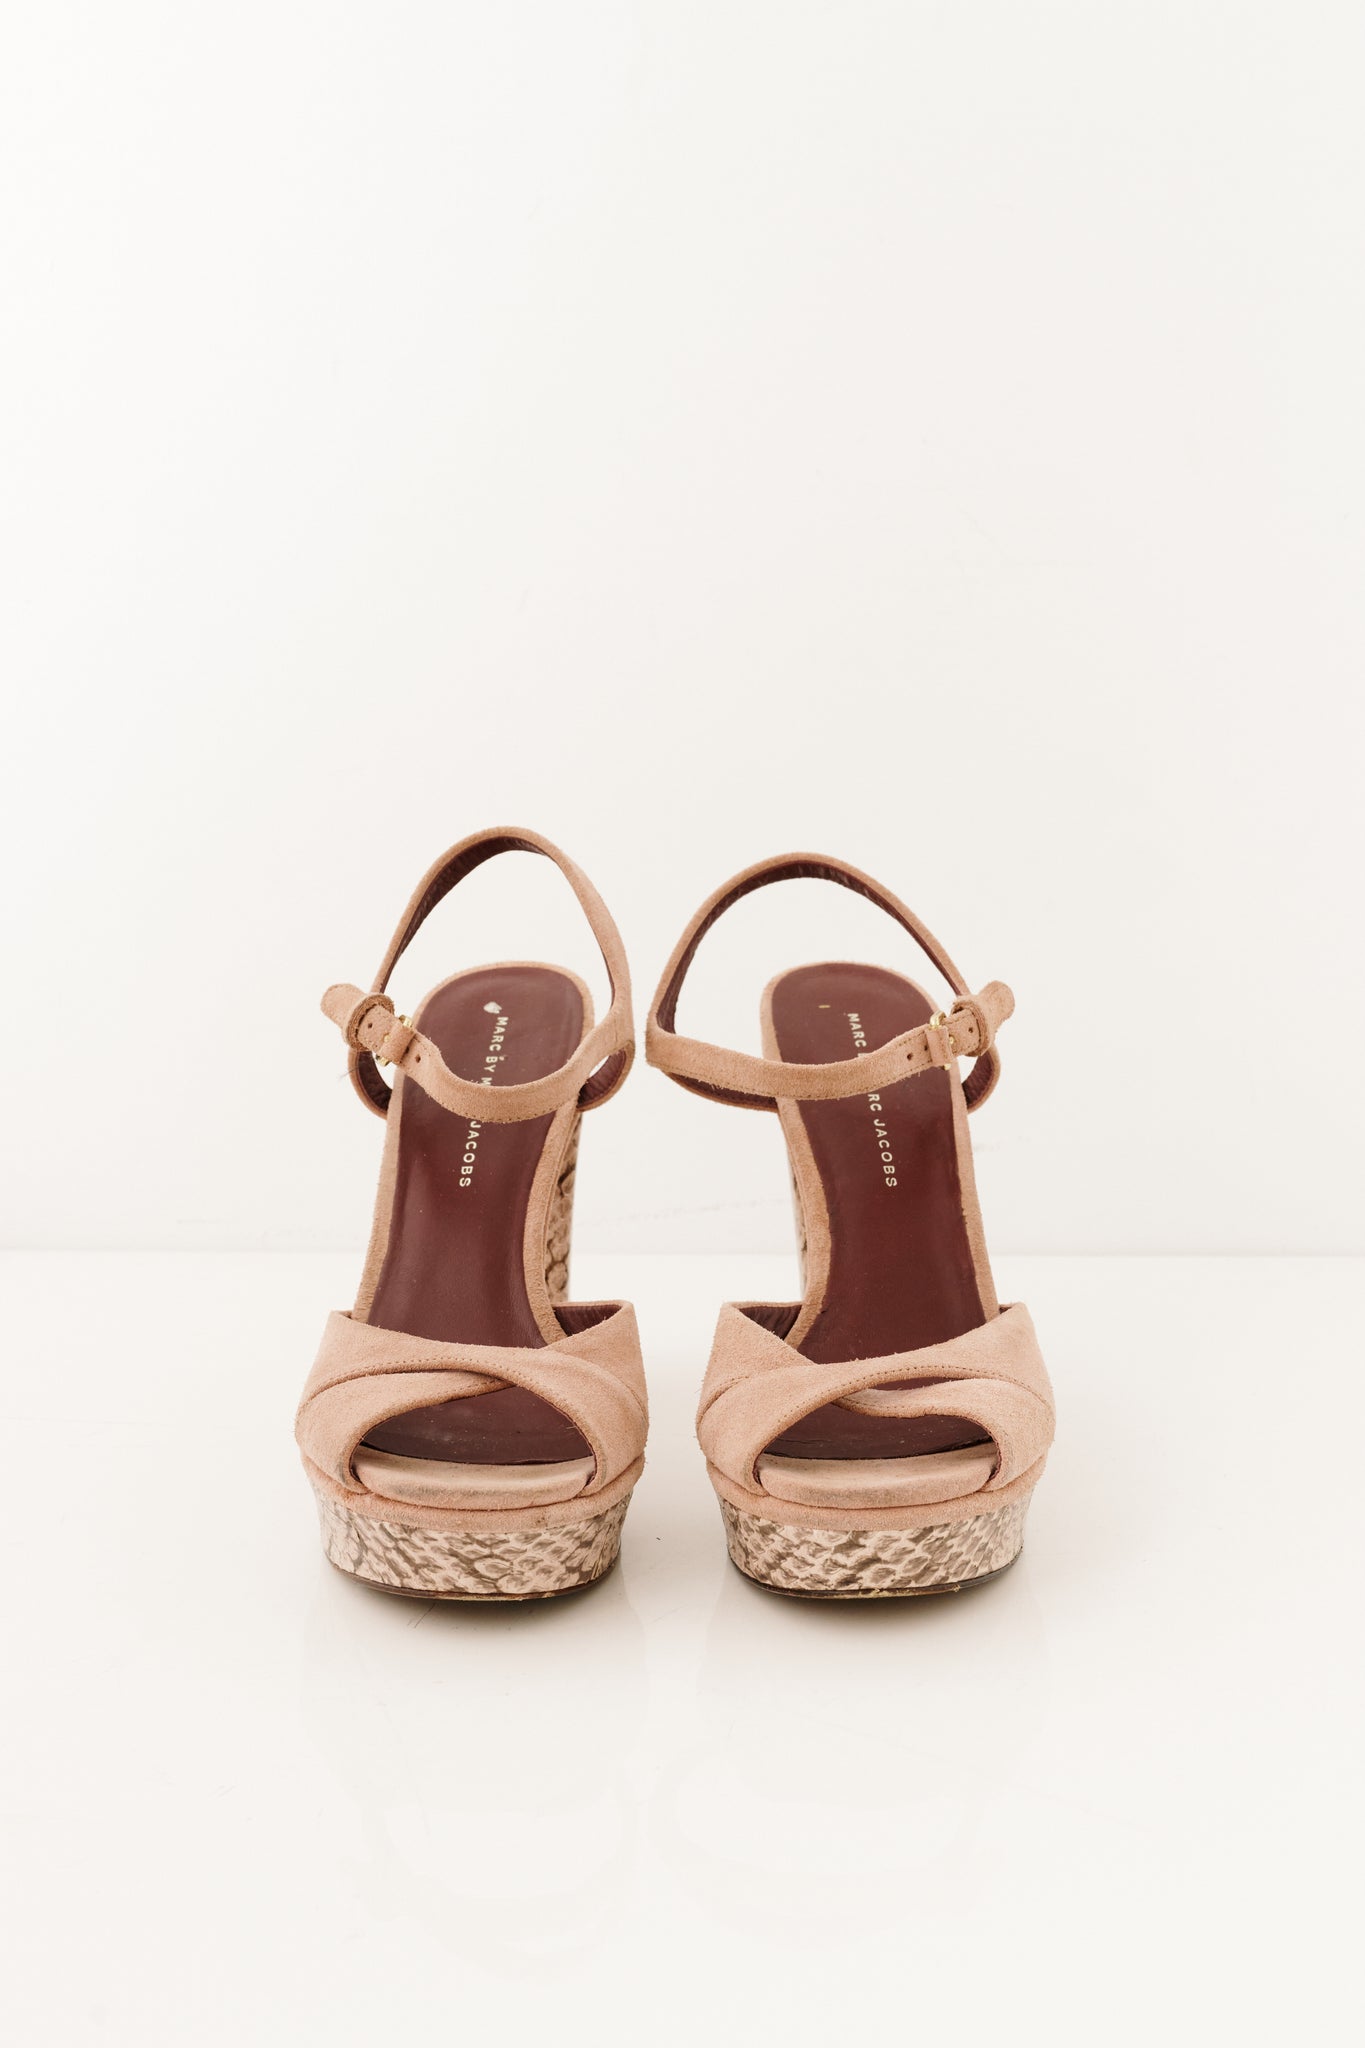 Marc by MJ Pink Suede Sandals